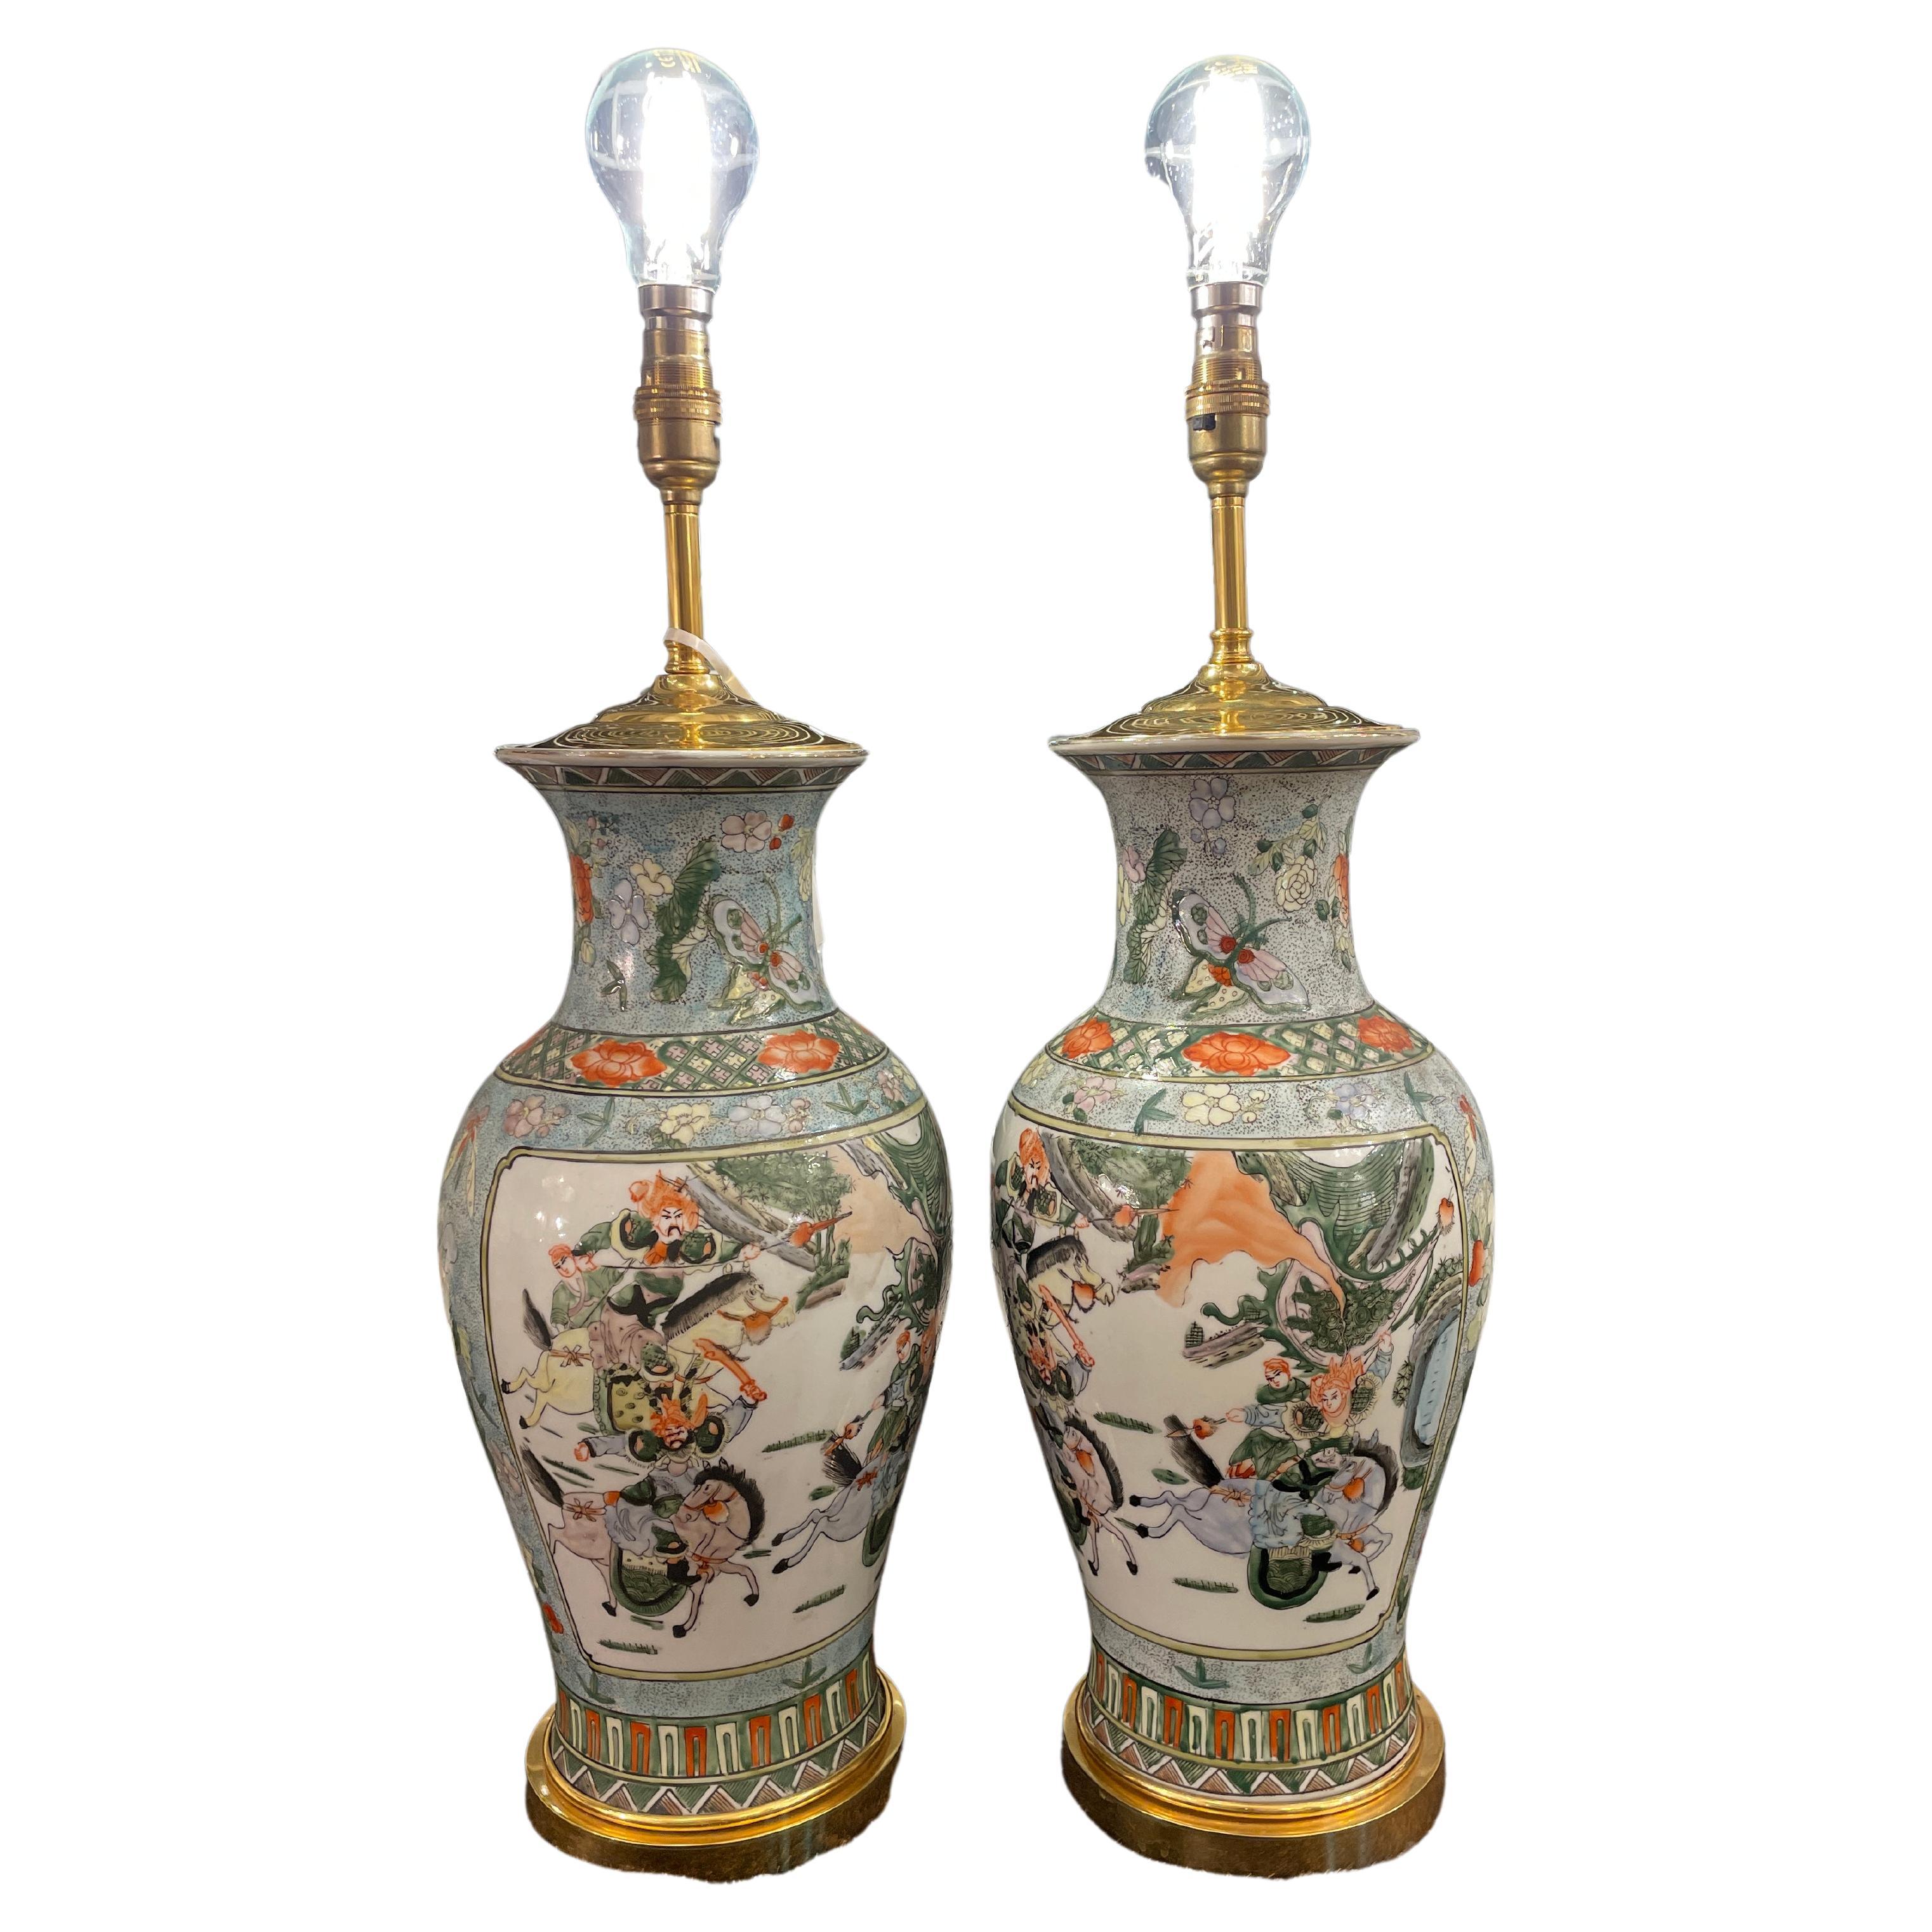 Beautiful Pair of Decorated Ceramic Vases in the Chinese Style